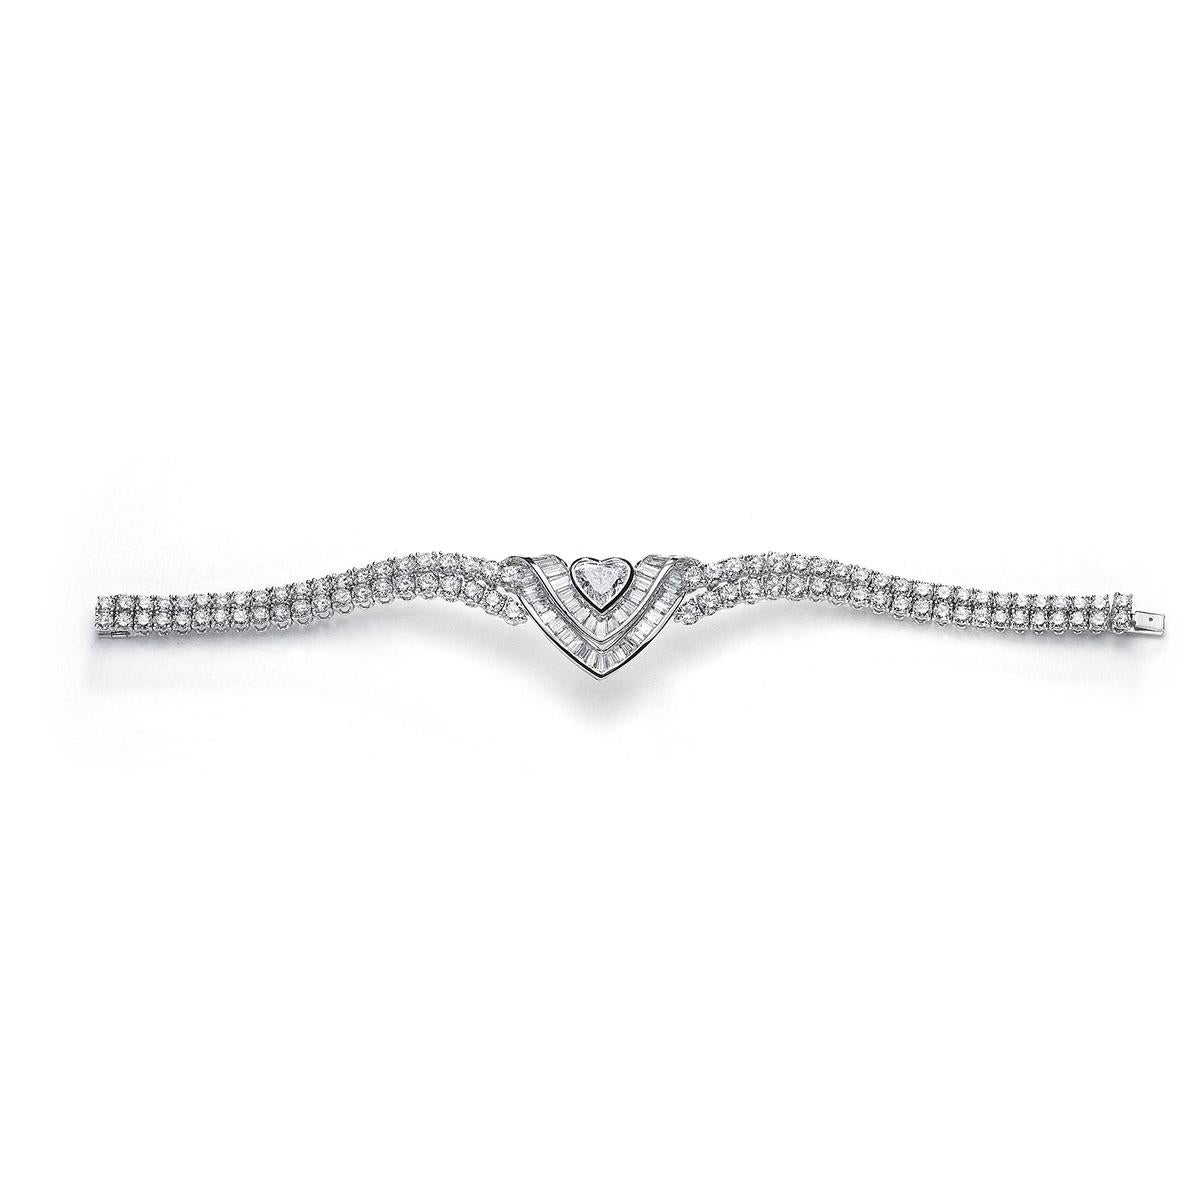 Bracelet in 18kt white gold set with one heart shaped diamond 2.12 cts, 56 tapers cut diamonds 6.55 cts and 92 diamonds 17.21 cts     